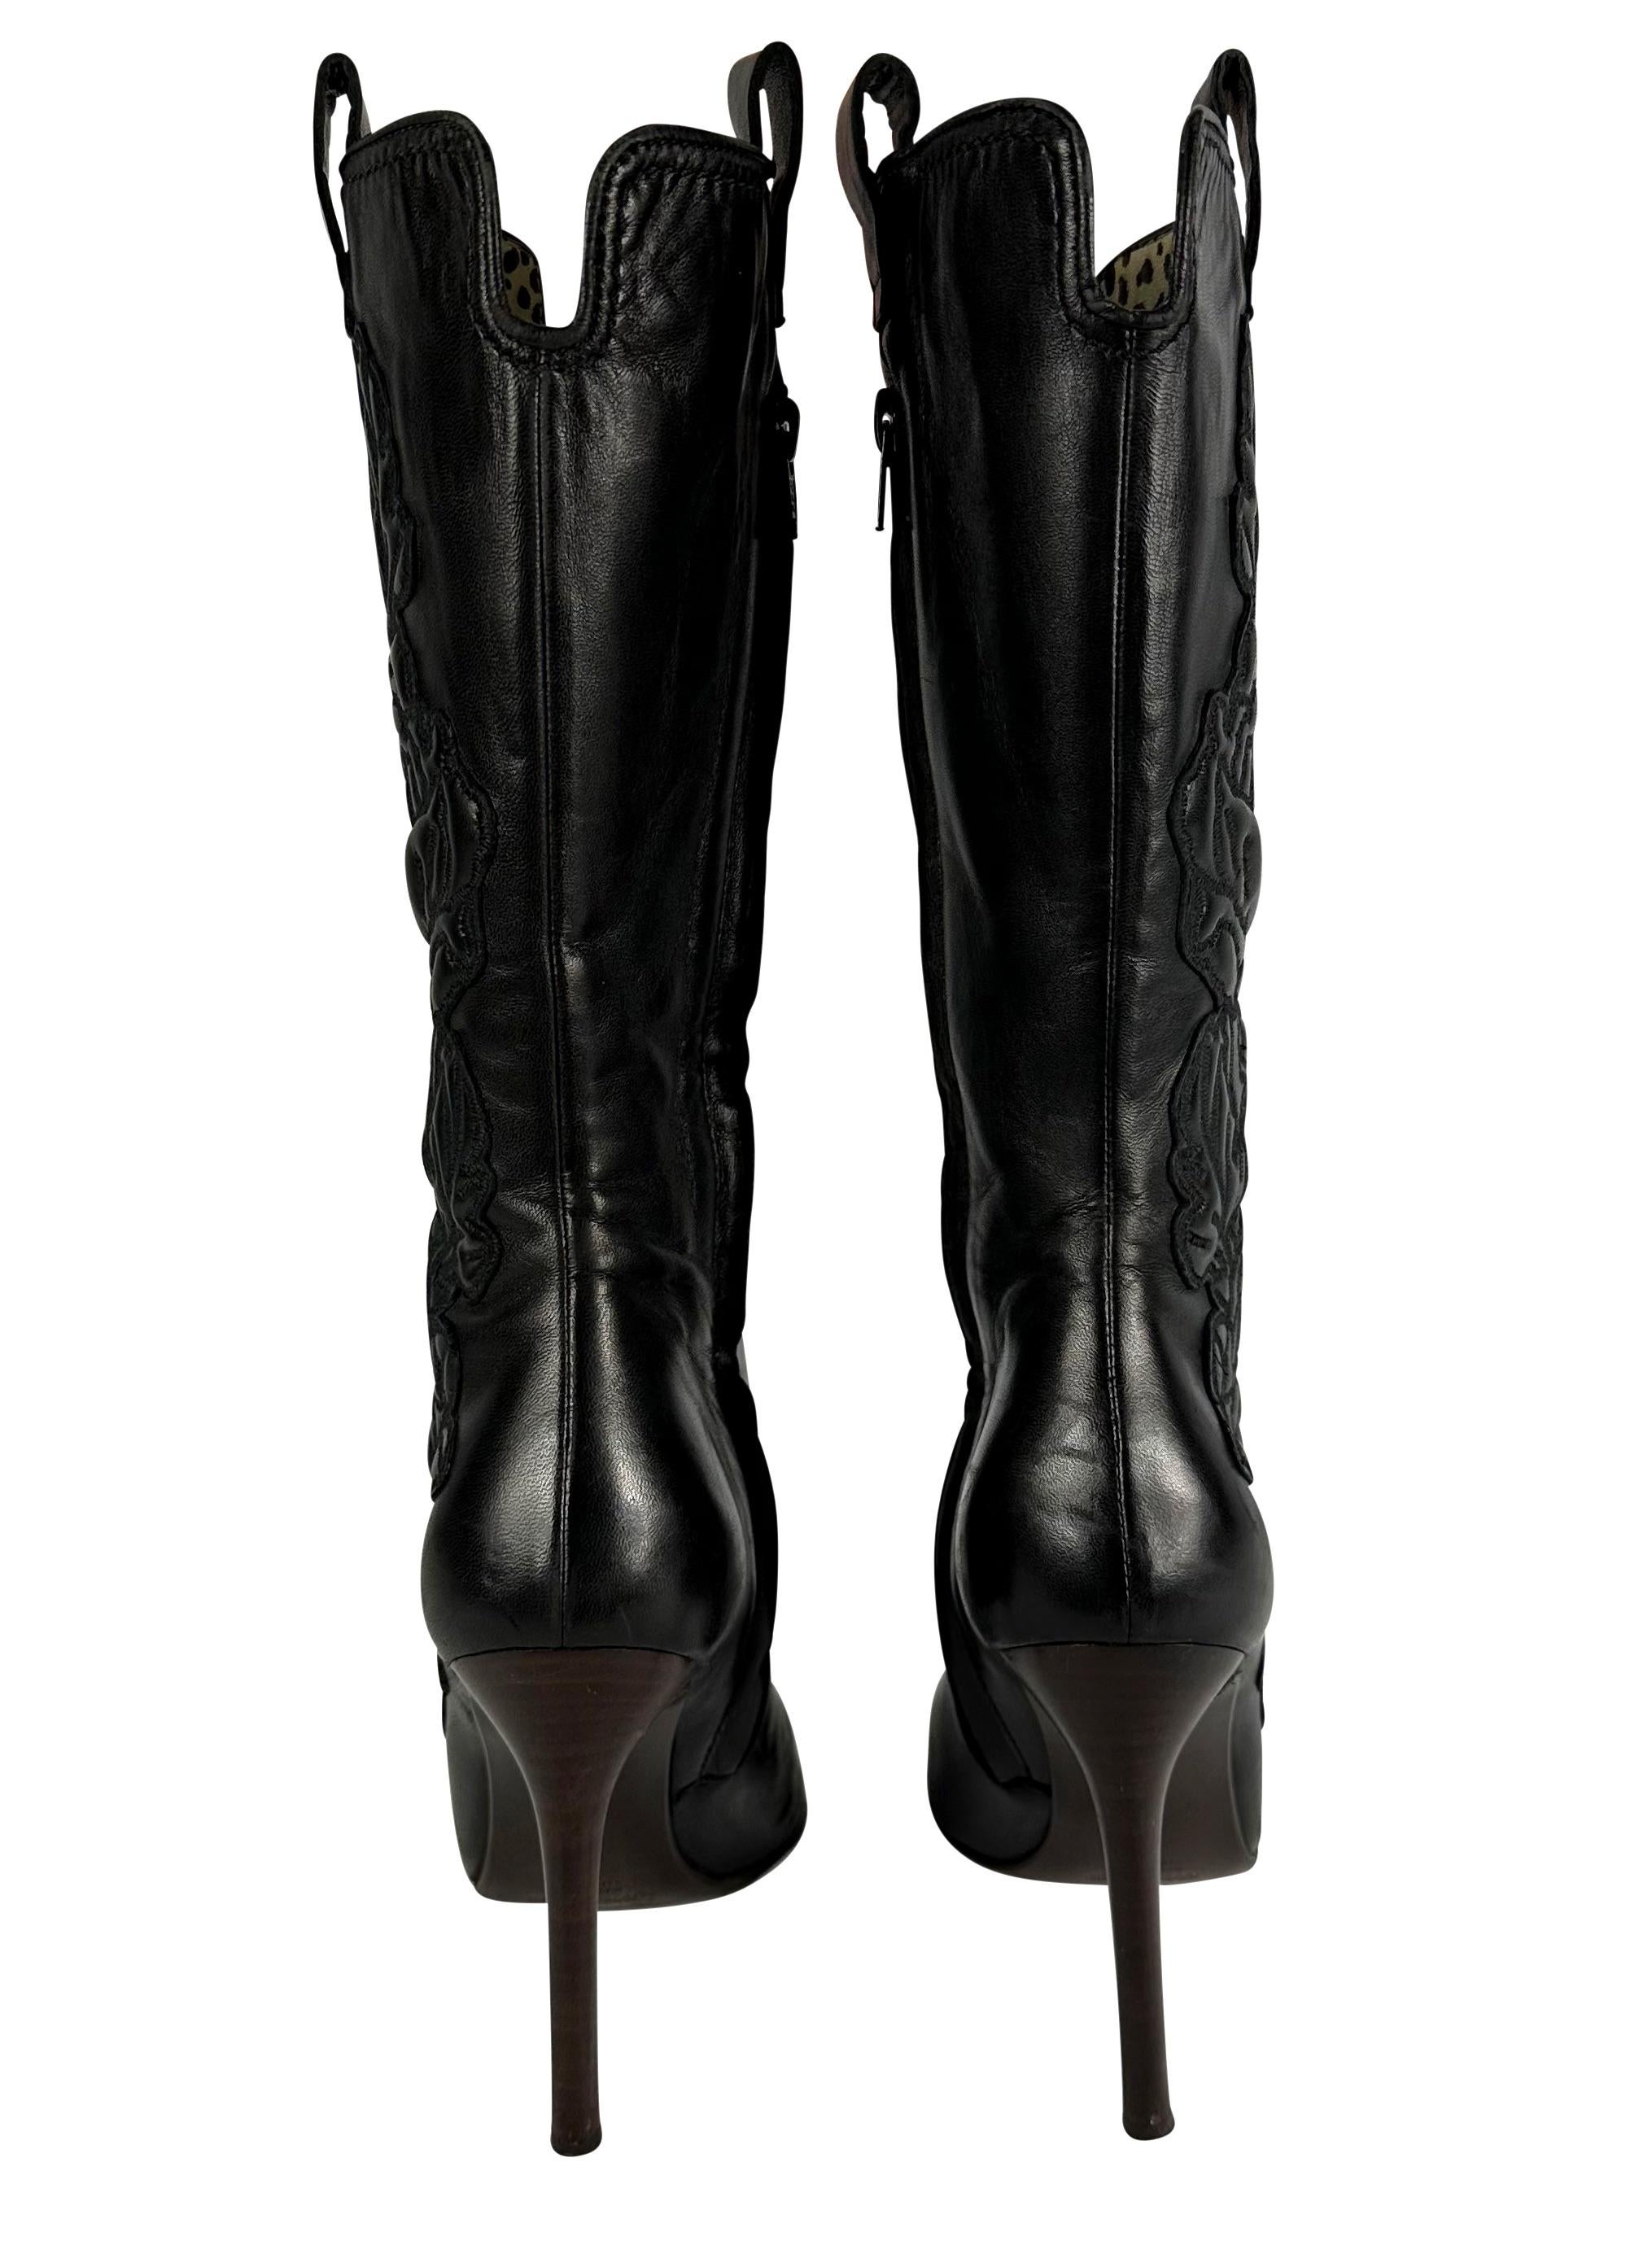 Women's 2003 Roberto Cavalli Rose Embroidered Black Leather Heeled Boots 37 IT 